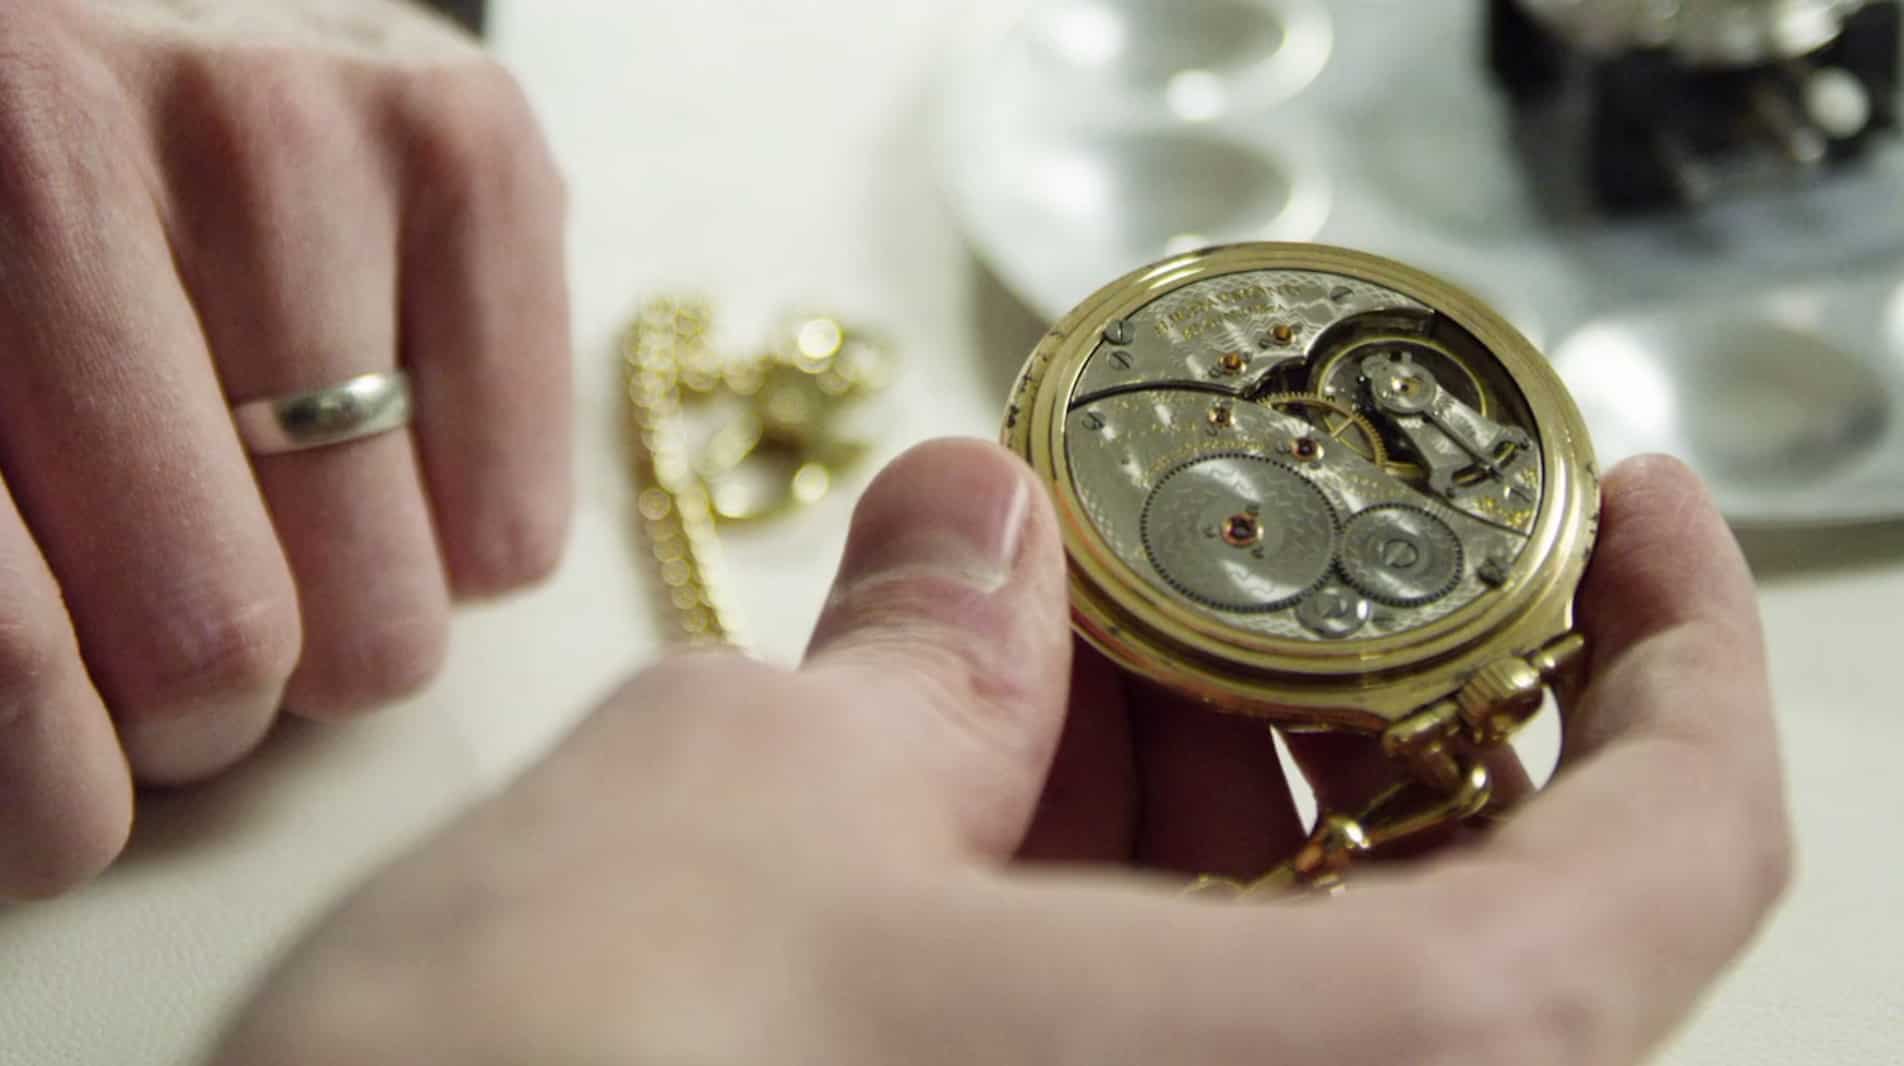 “Keeper of Time,” a Documentary Film About Horology Now on Kickstarter